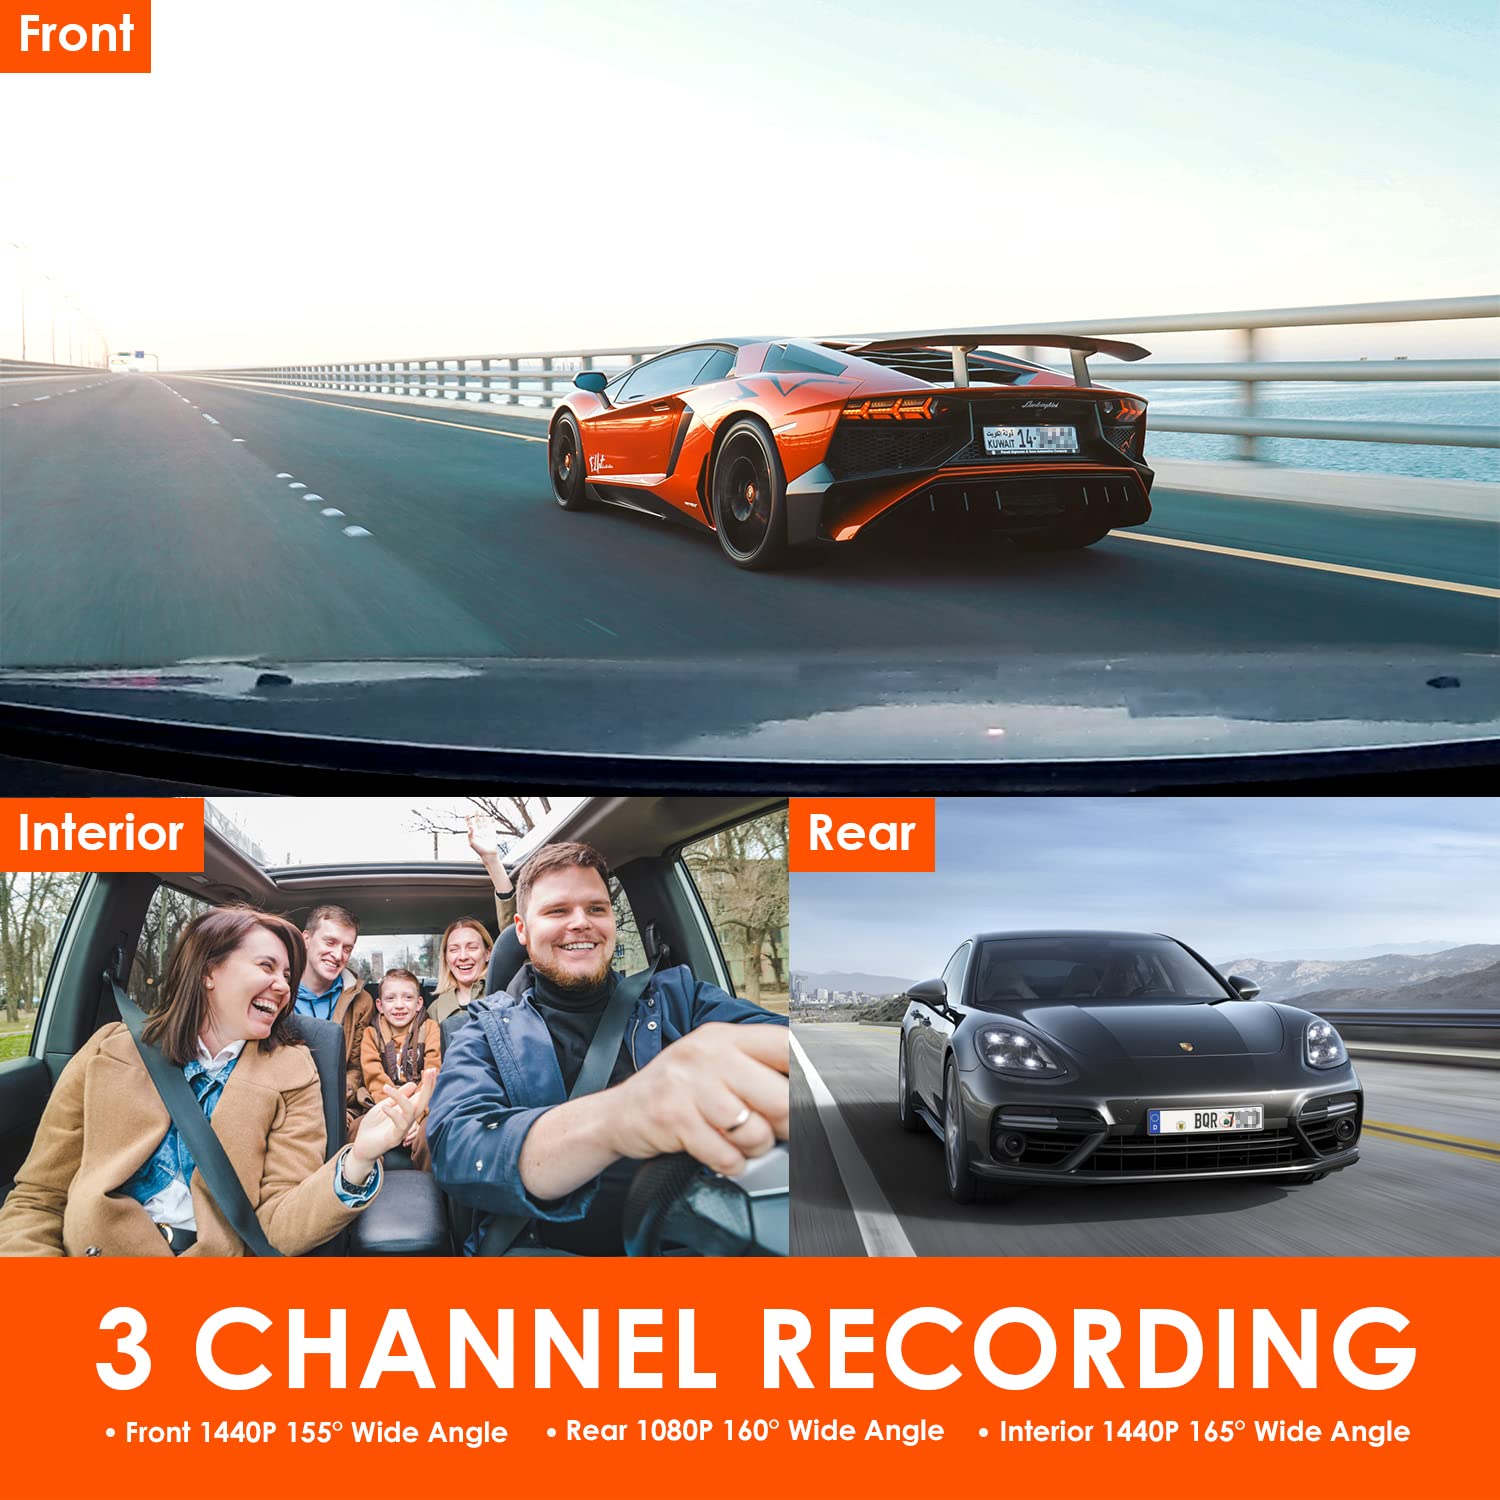 Vantrue N4 3 Channel 4K Dash Cam, 4K+1080P Front and Rear, 1440P+1440P Inside, 1440P+1440P+1080P Three Way Triple Car Camera, IR Night Vision, 24hr Parking Mode, Capacitor, Support 256GB Max